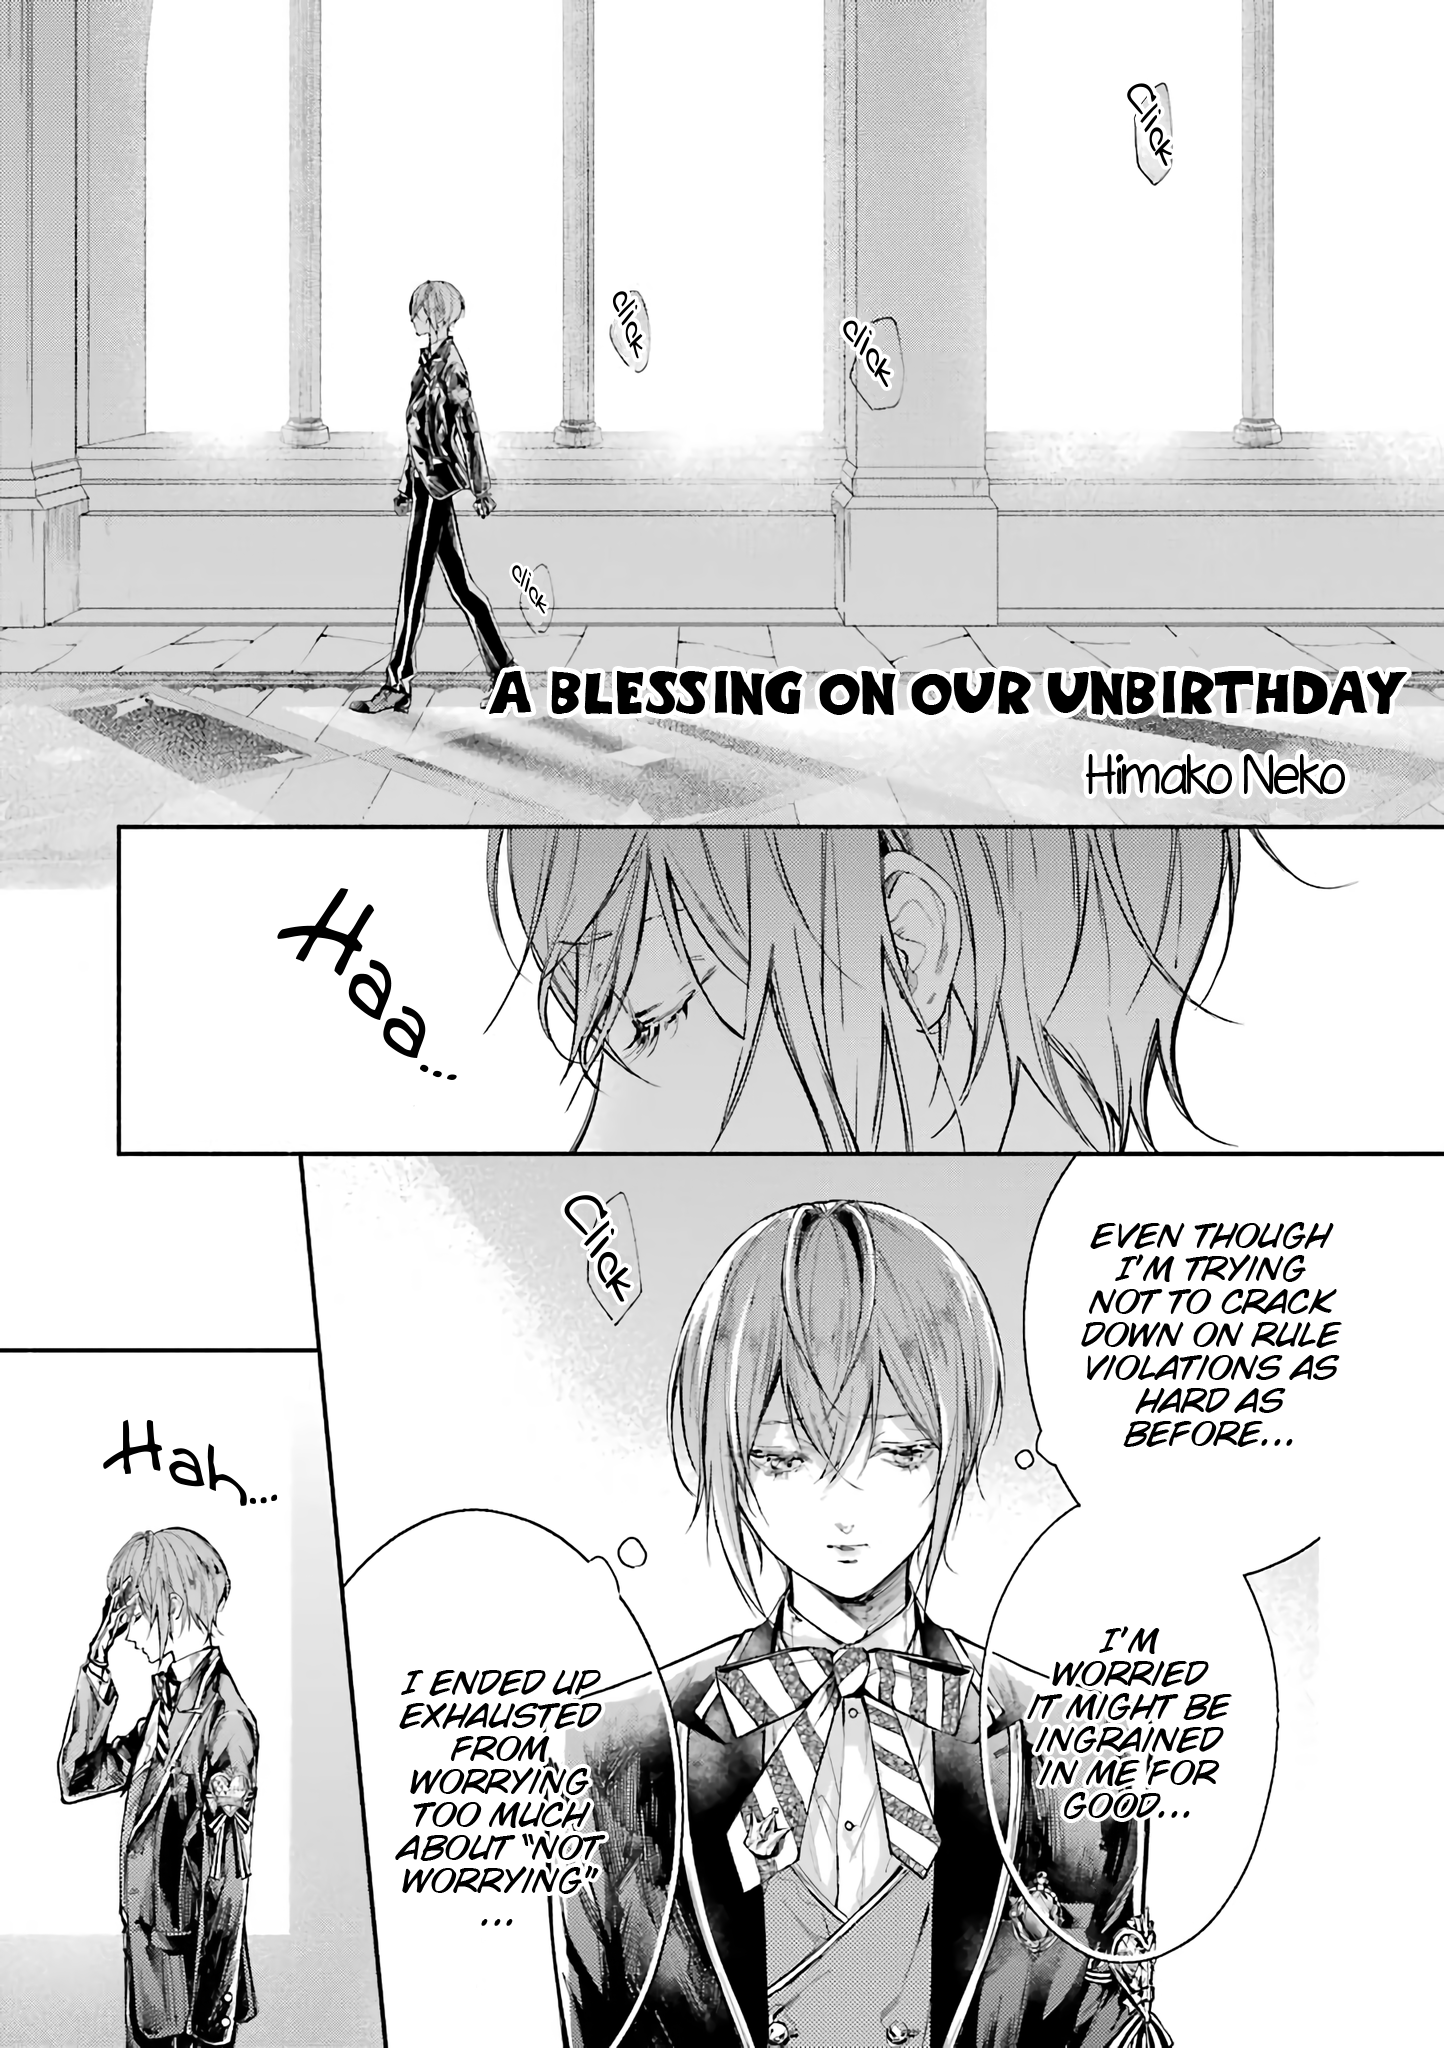 Disney Twisted Wonderland Comic Anthology Vol.1 Chapter 16: A Blessing On Our Unbirthday - Picture 1